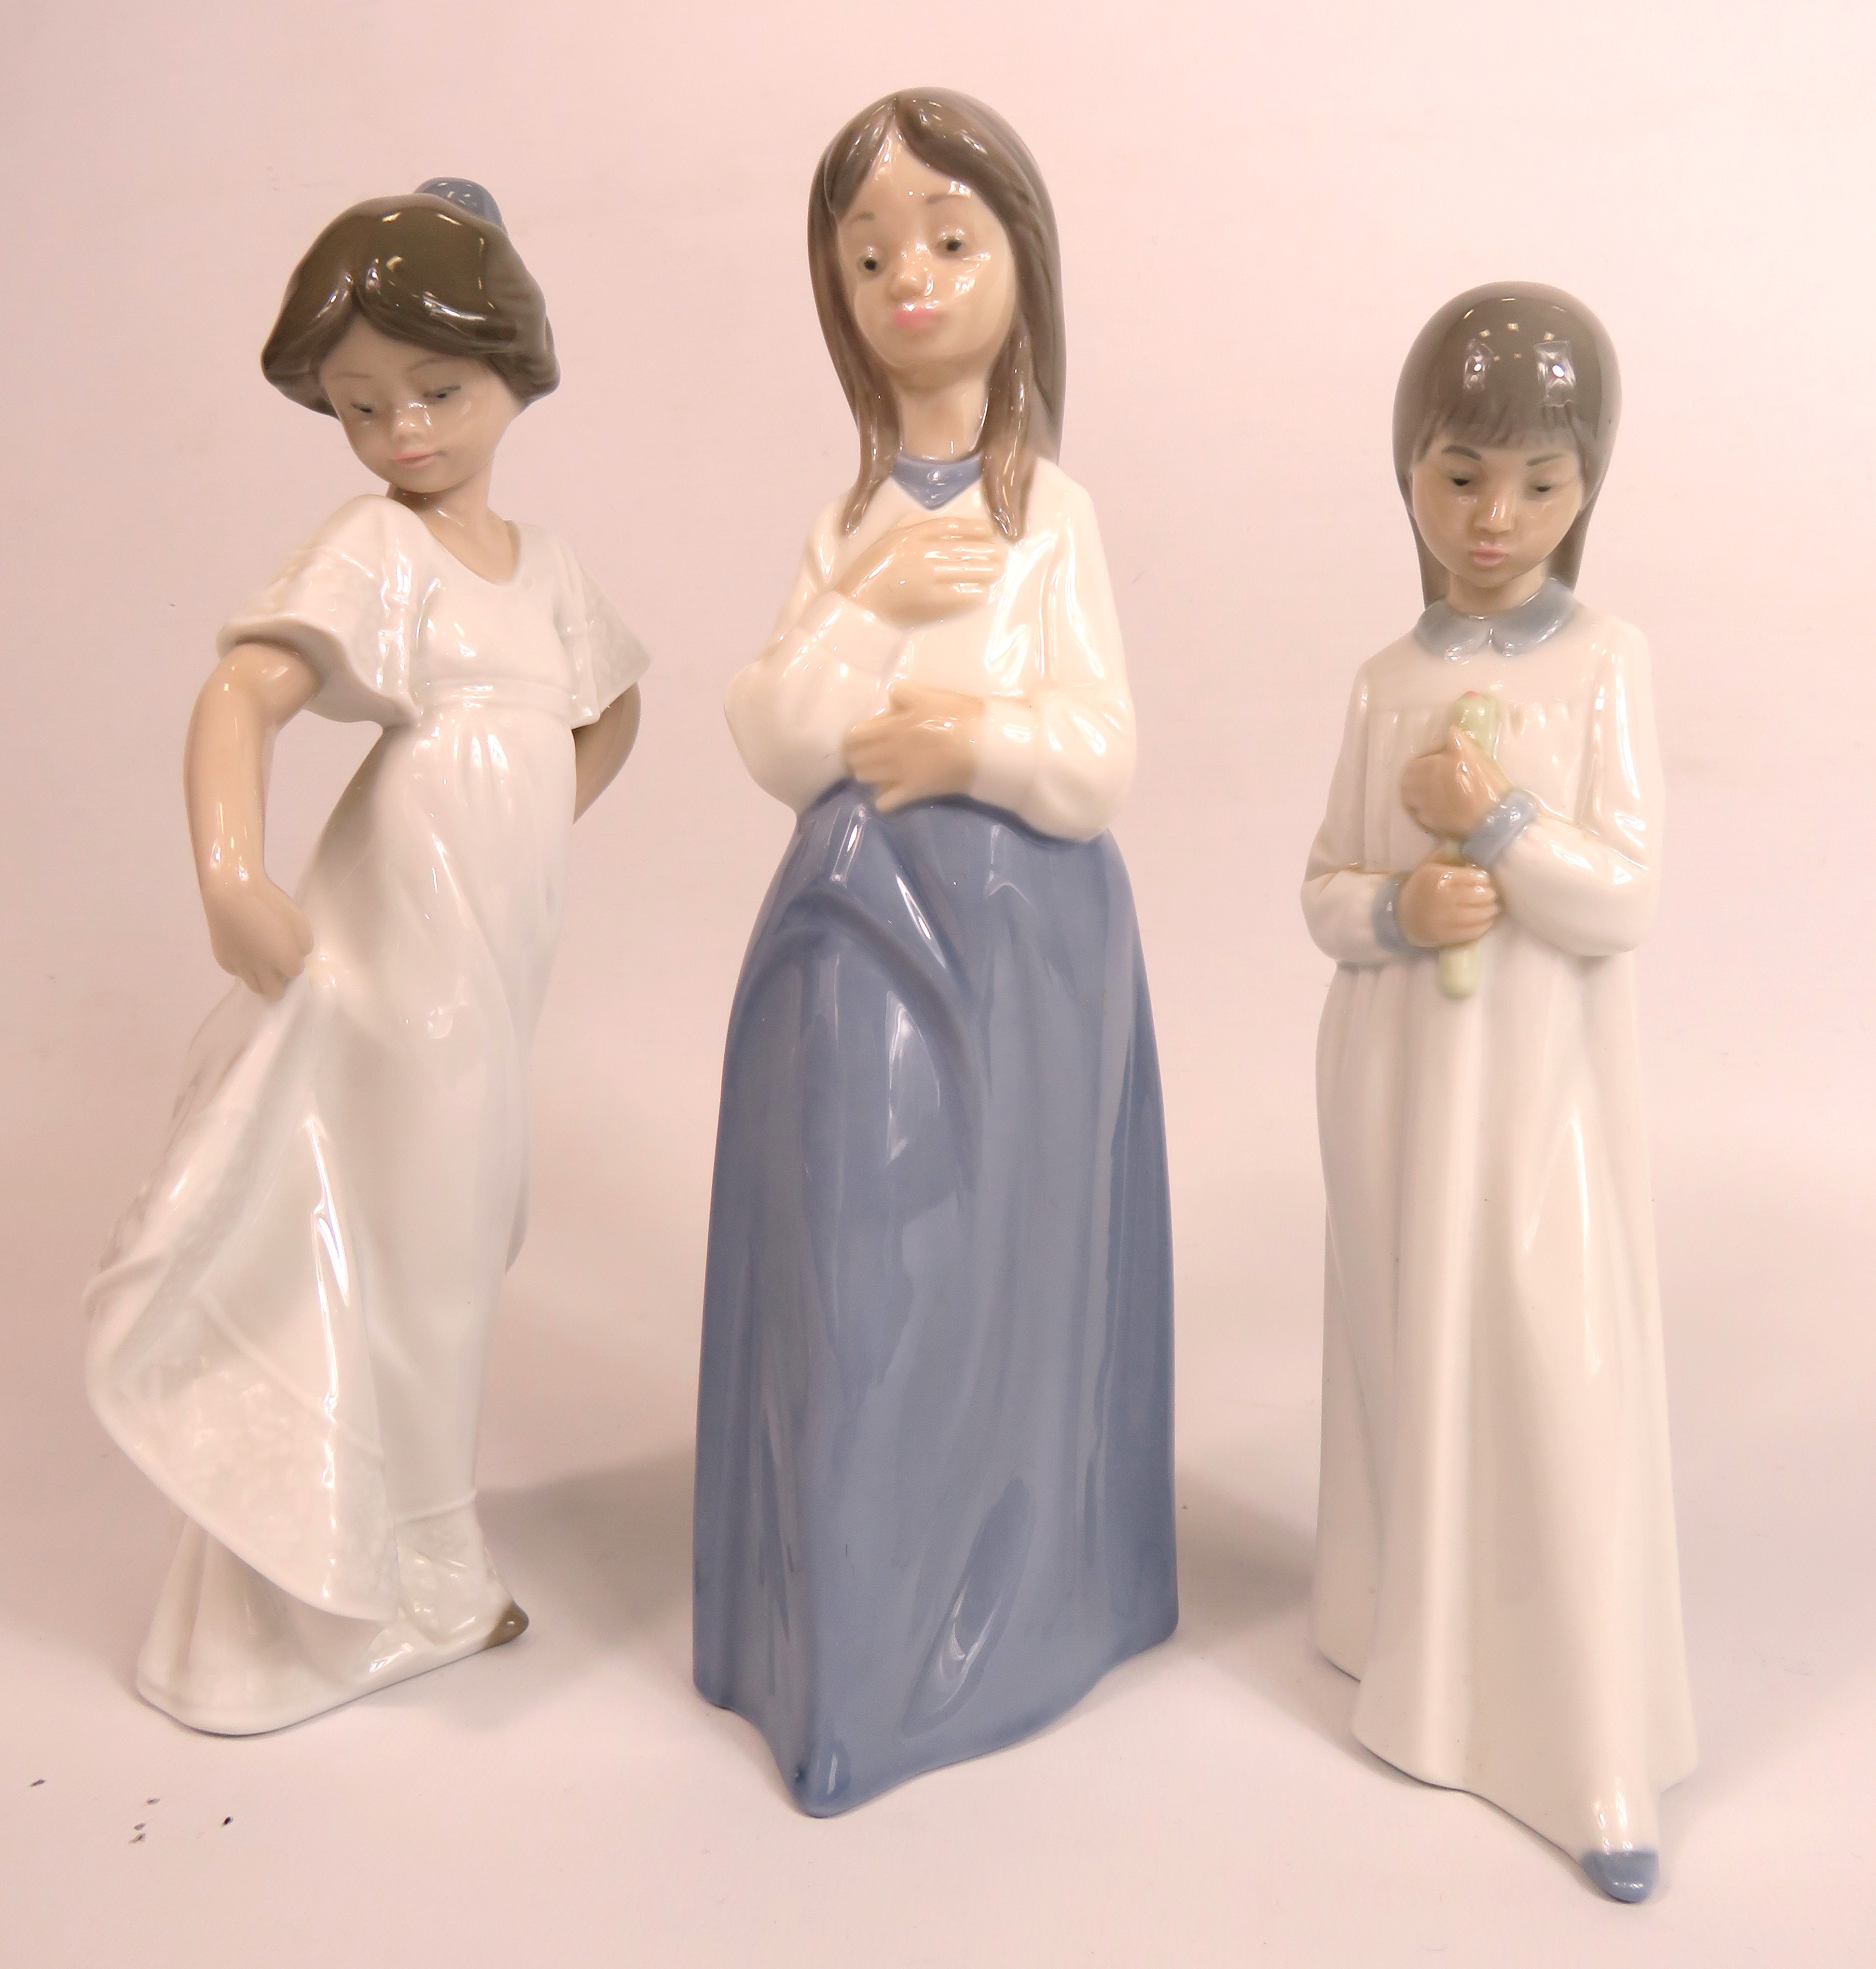 3 Nao figurines of girls the tallest stands 23cm.